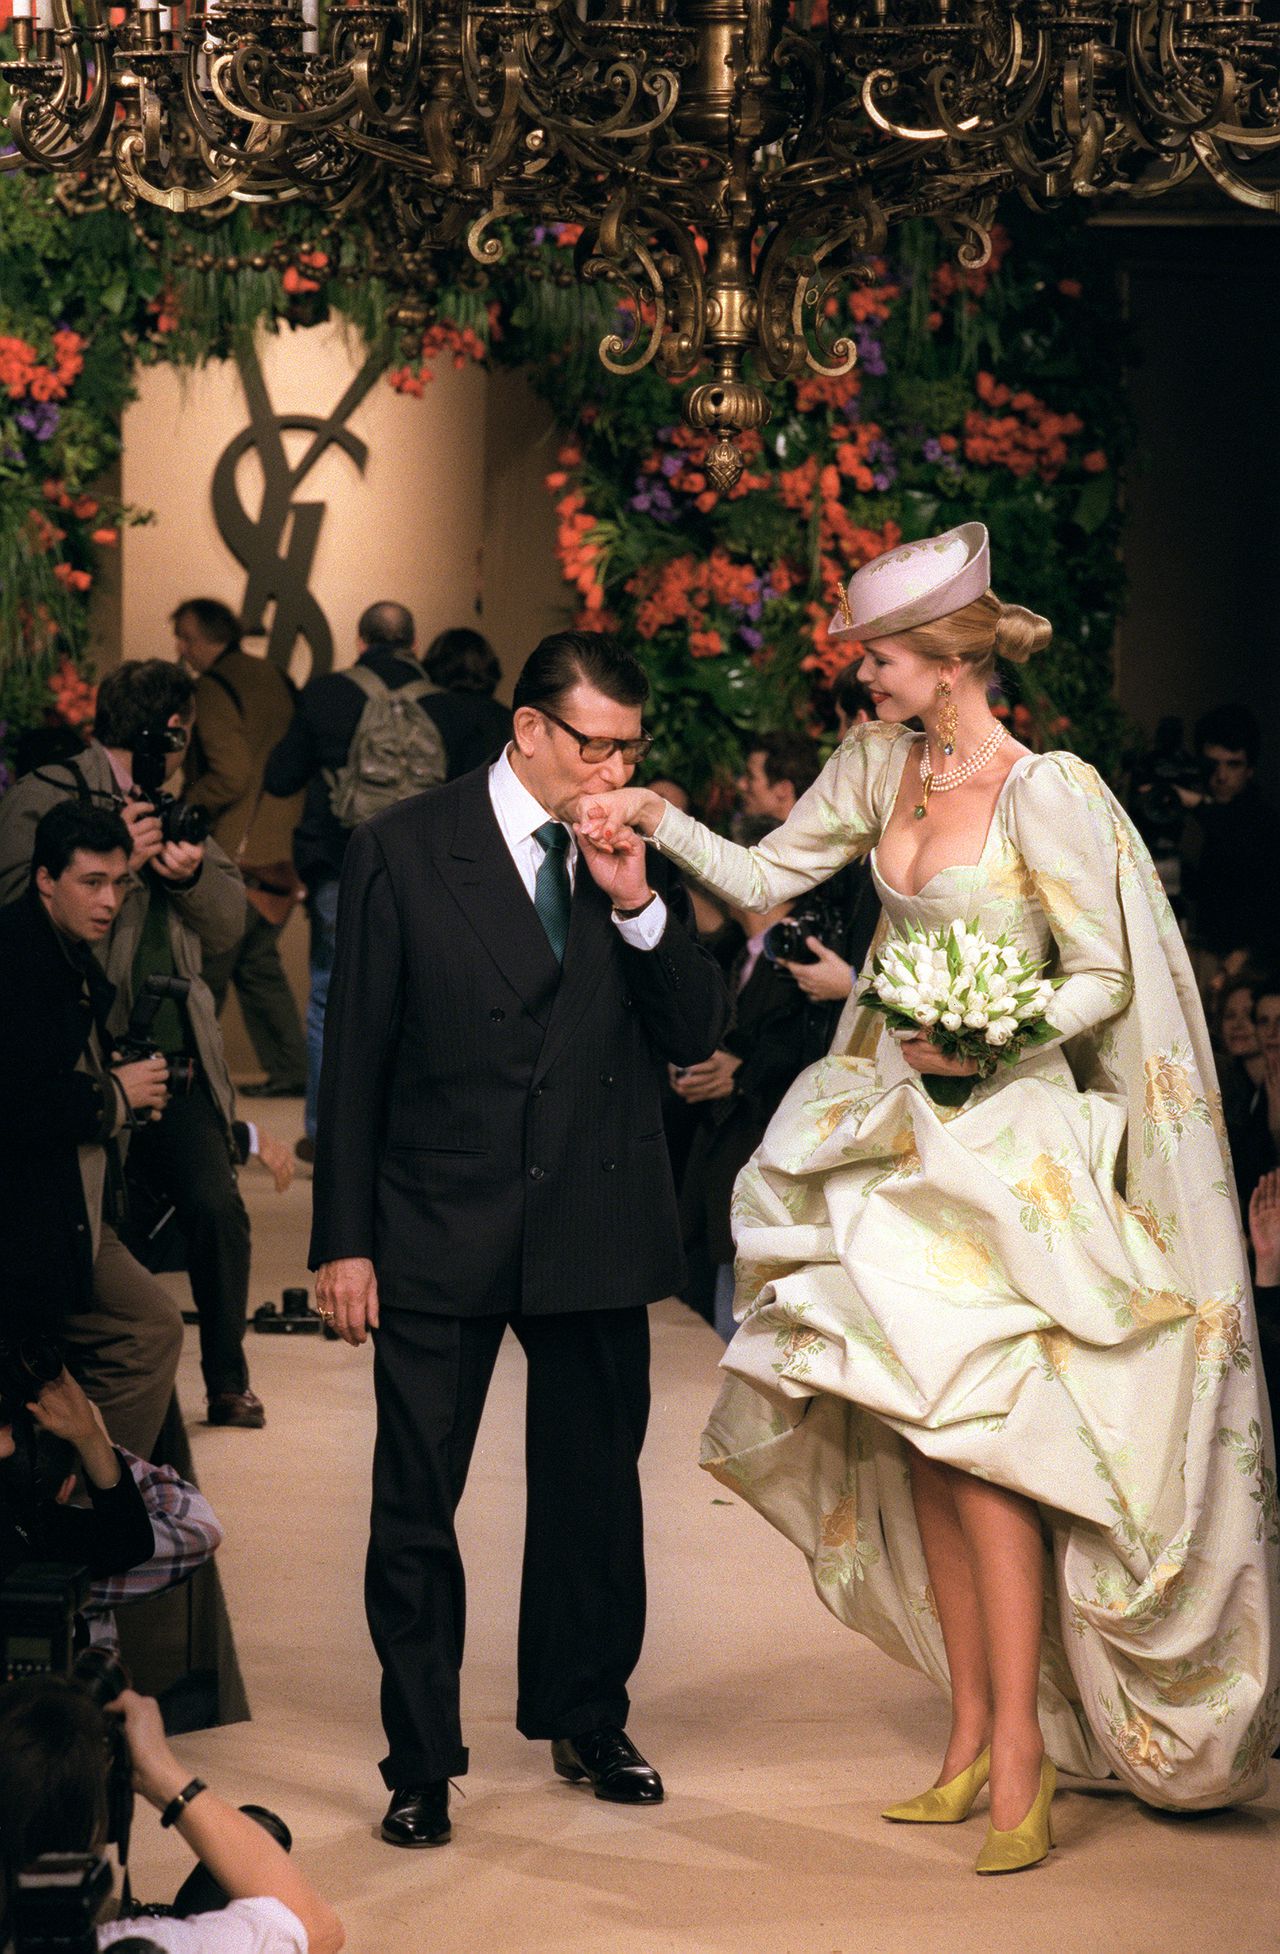 Yves Saint Laurent en model Claudia Schiffer bij een modeshow in 1997. Foto AFP (FILES) French designer Yves Saint Laurent hand kisses model Claudia Schiffer, on January 22 1997 in Paris, after the presentation of his Spring-summer Haute Couture collection. Yves Saint Laurent, one the top French designers of the 20th century, died in the evening on June 01, 2008, in Paris, the Pierre-Berge-Saint Laurent Foundation said. The reclusive French maestro, who had retired from haute couture in 2002 after four decades at the top of his trade, had been ill for some time. AFP PHOTO PIERRE VERDY